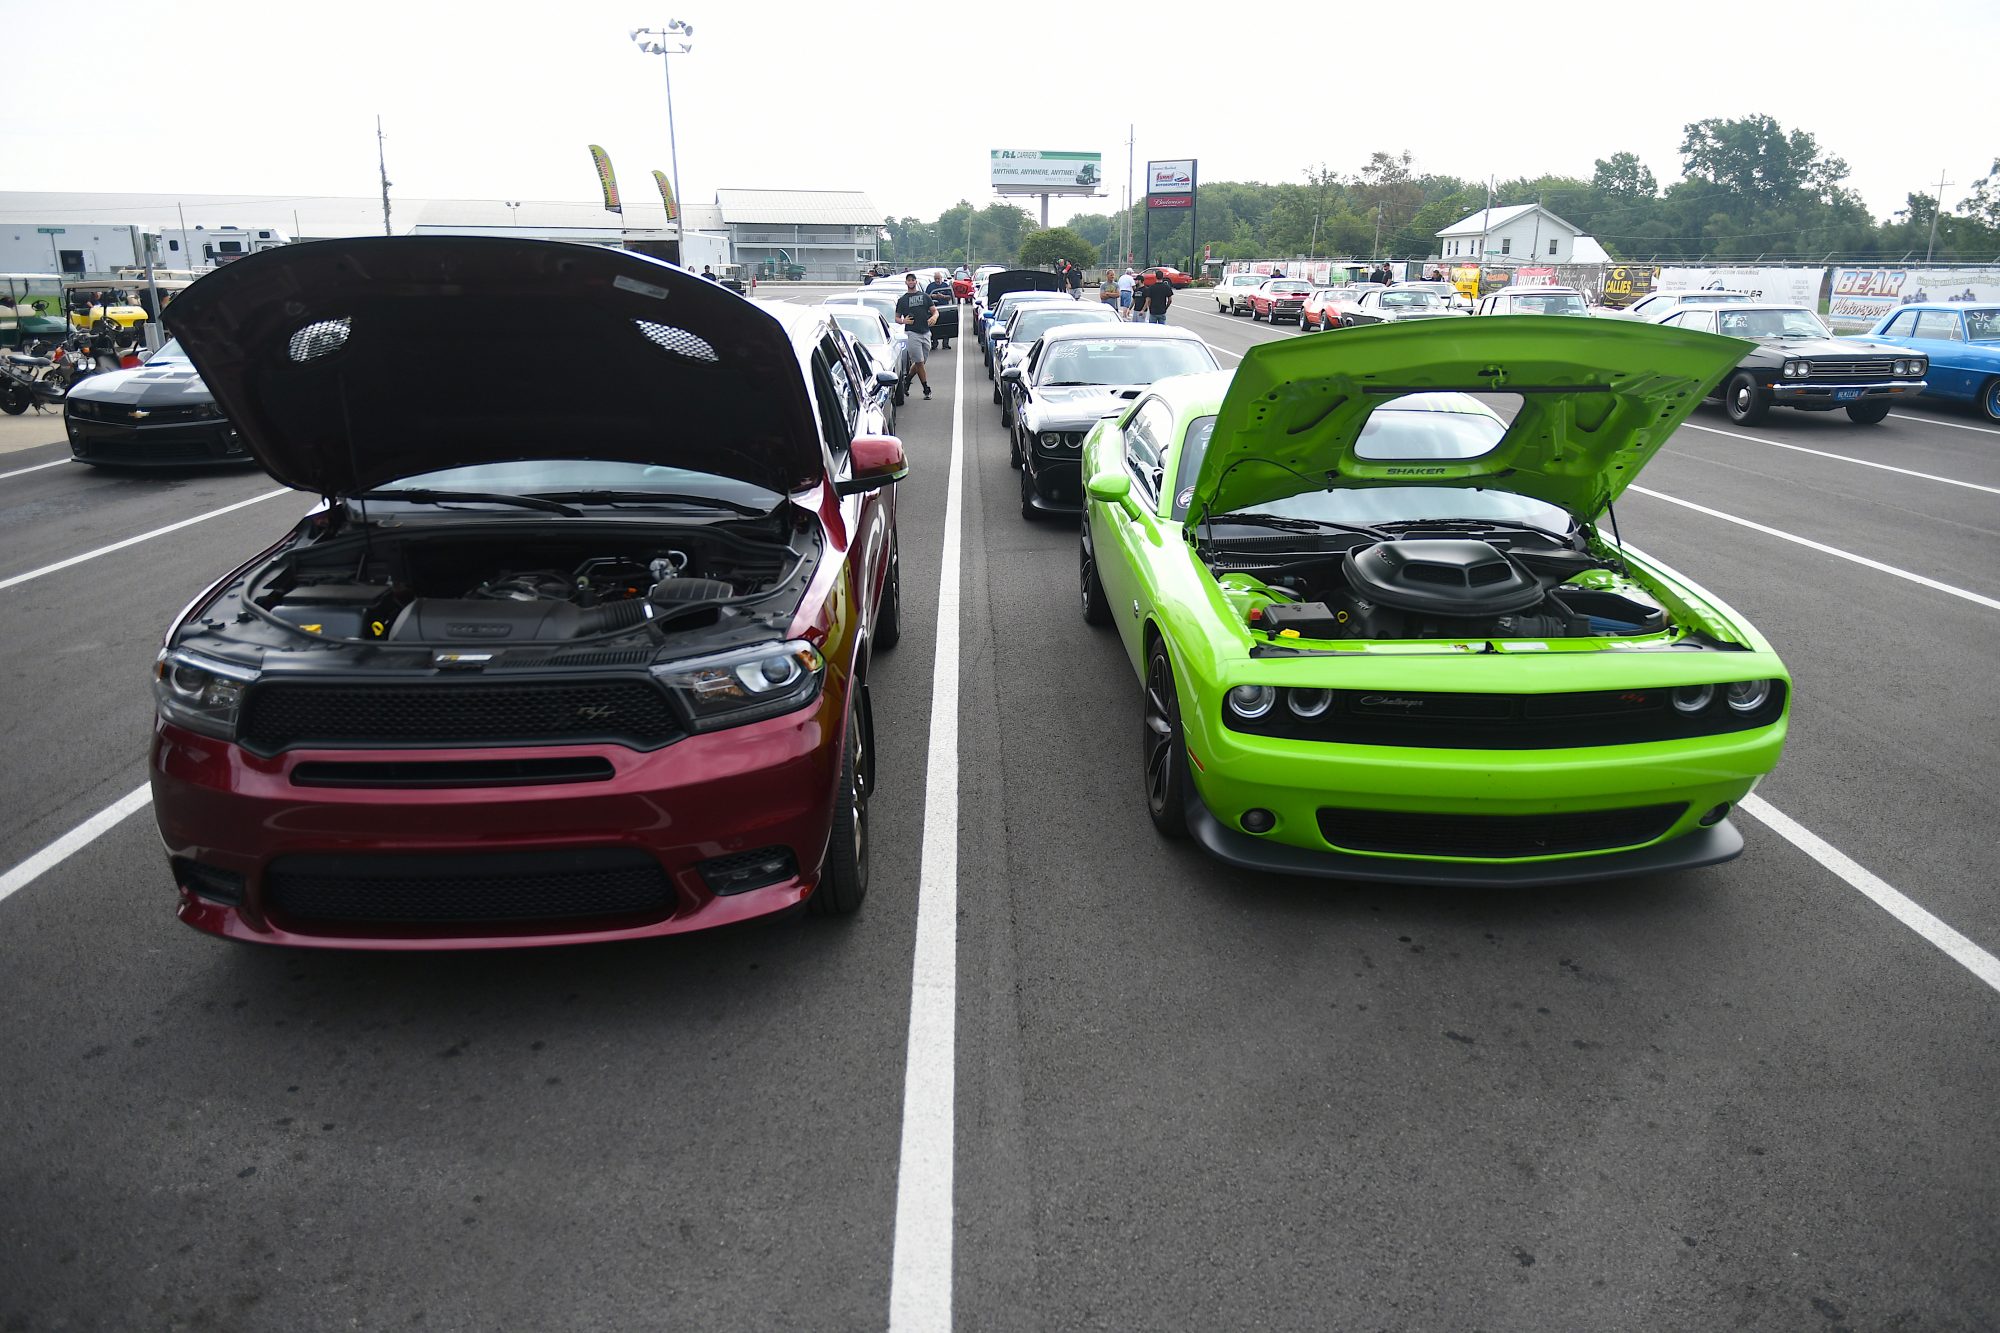 Dodge vehicles on display with their hoods open